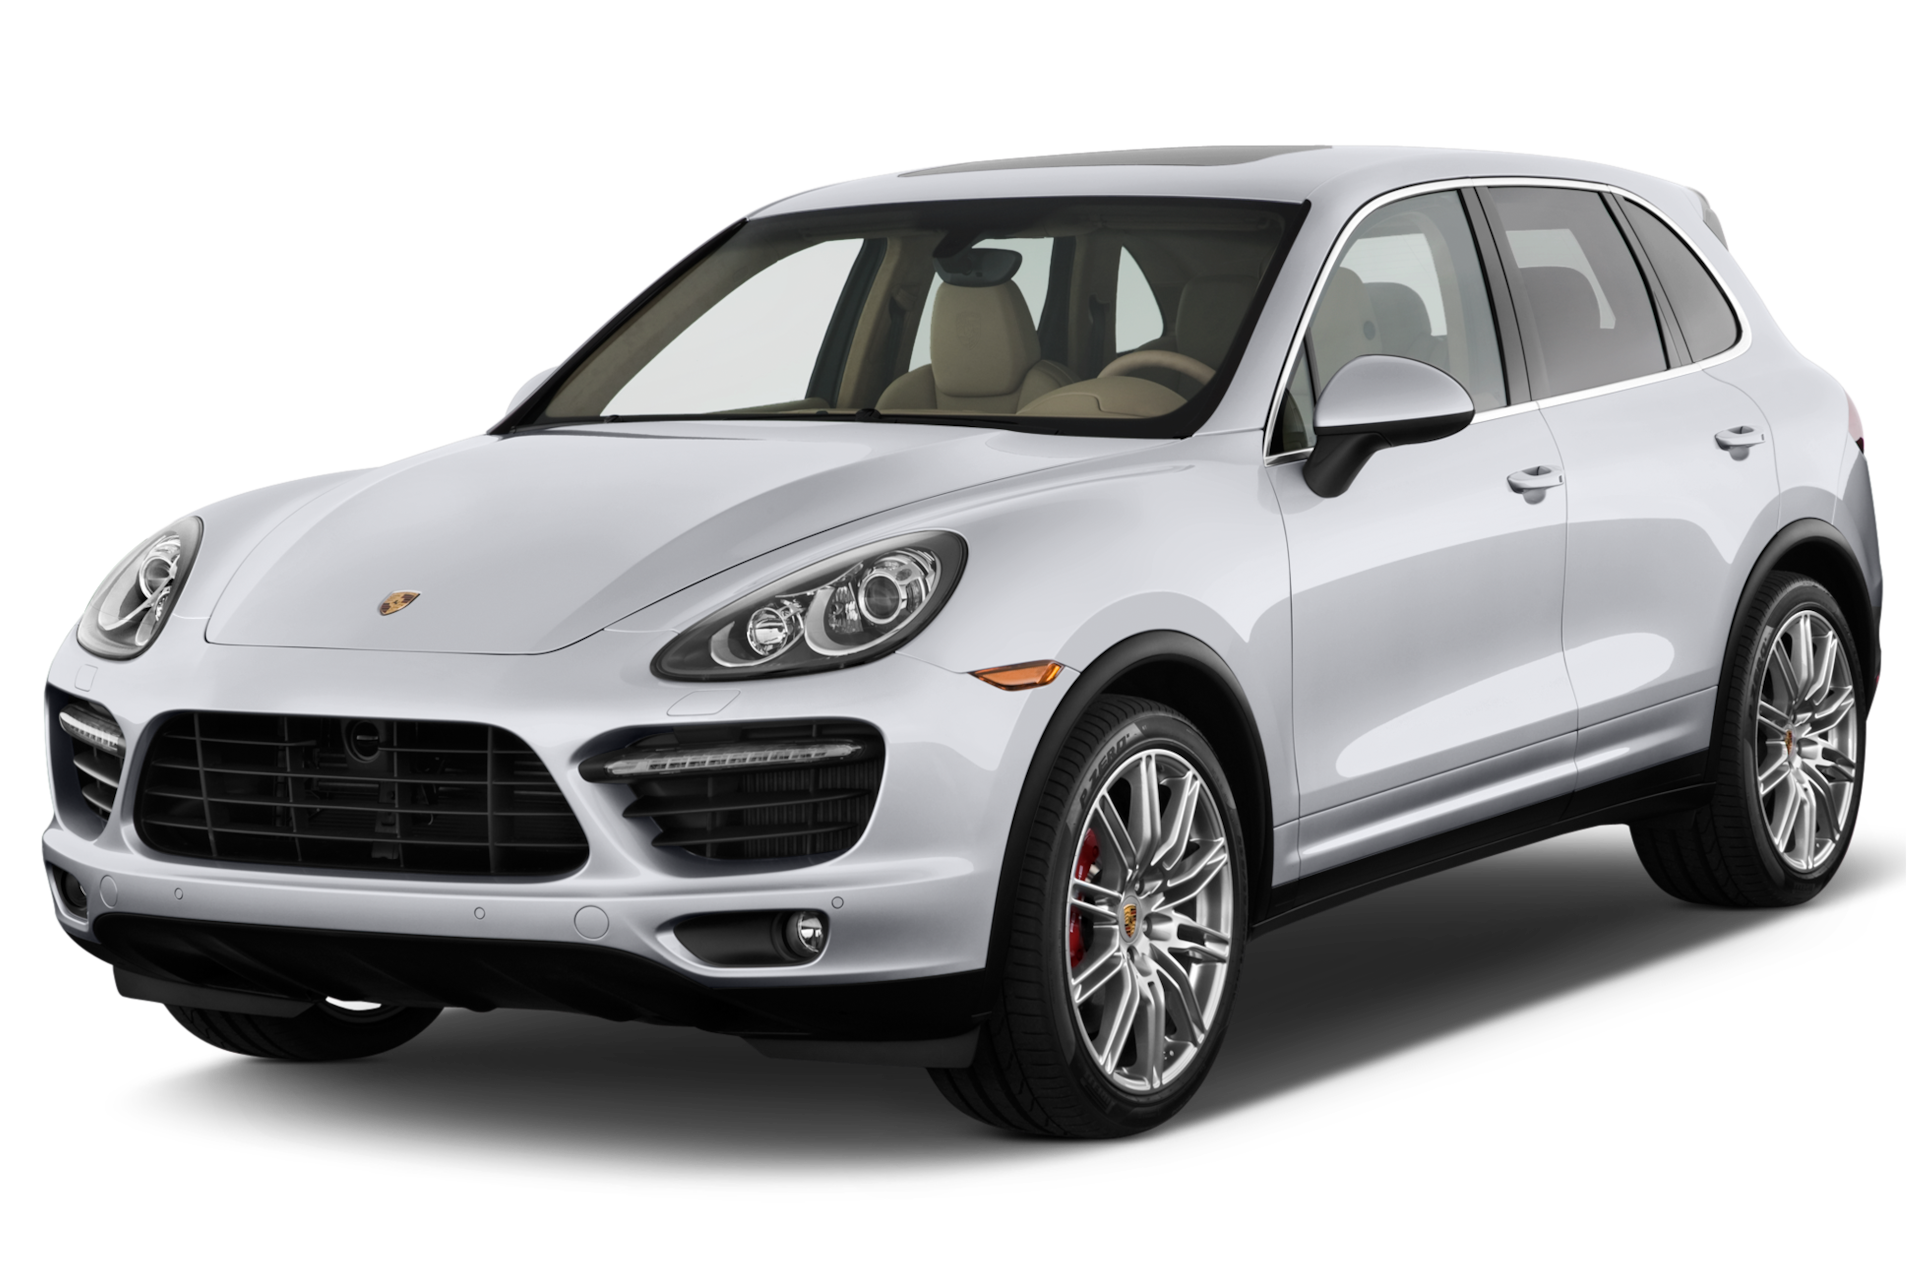 2011 Porsche Cayenne Prices, Reviews, and Photos - MotorTrend